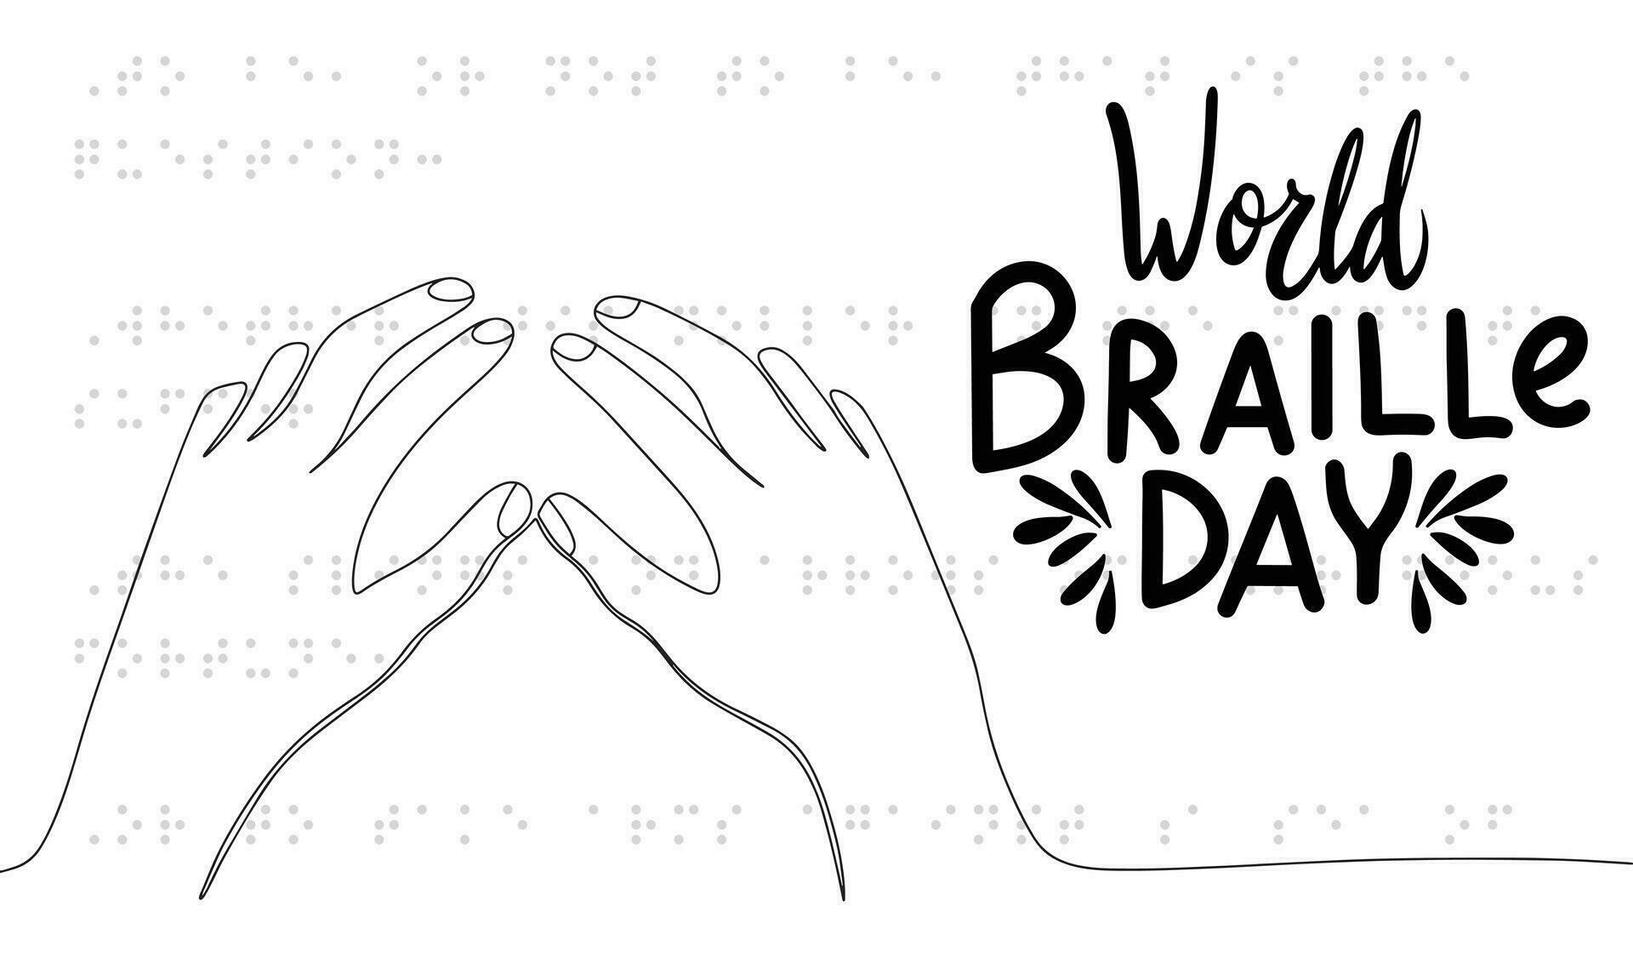 World Braille Day banner. Handwriting lettering World Braille Day text and line art hands with Braille dots. Hand drawn vector art.